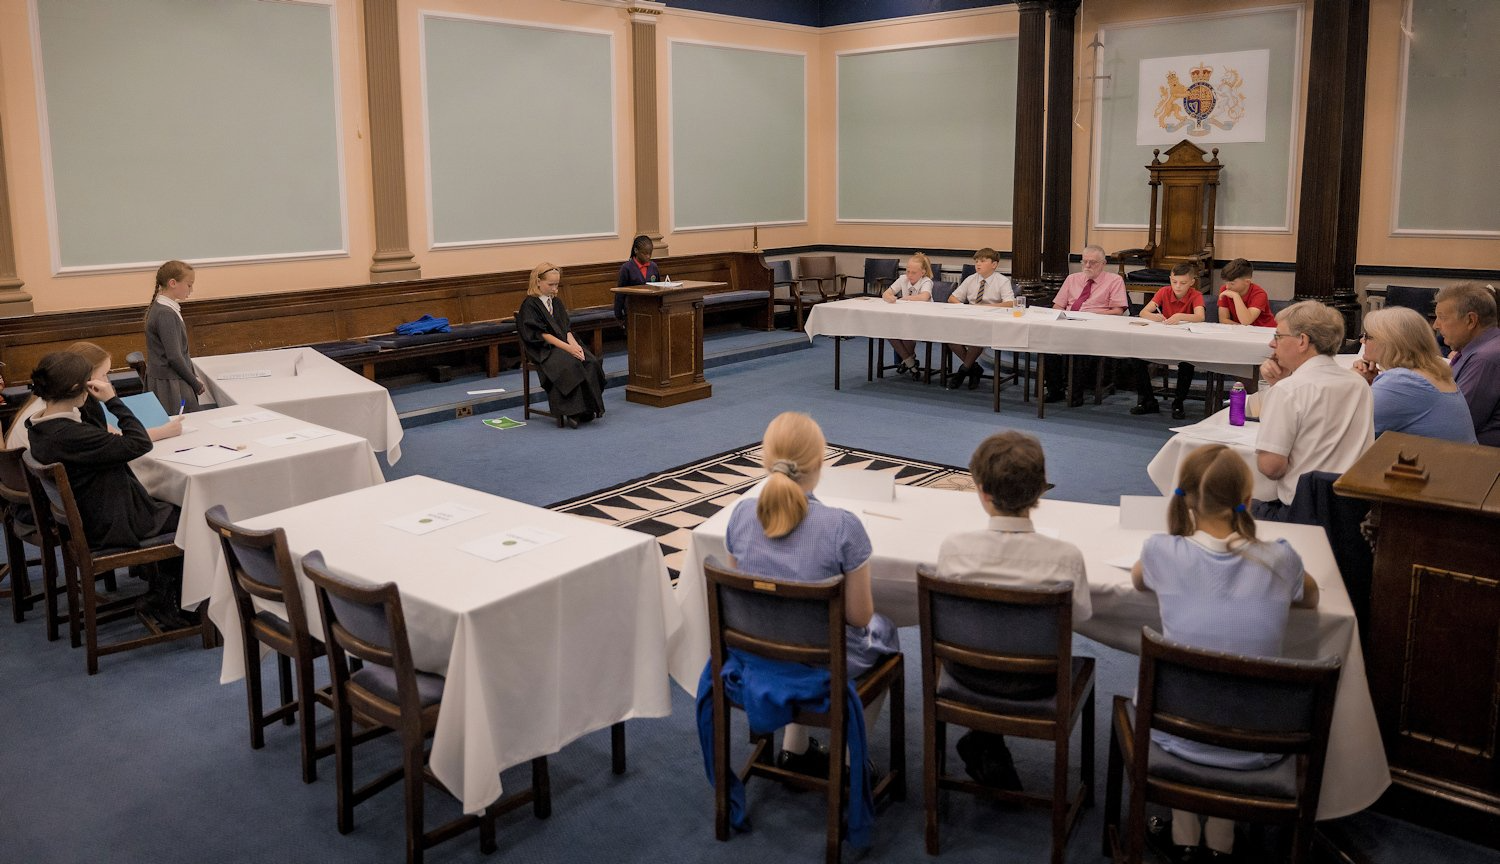 Simulated court room with participants